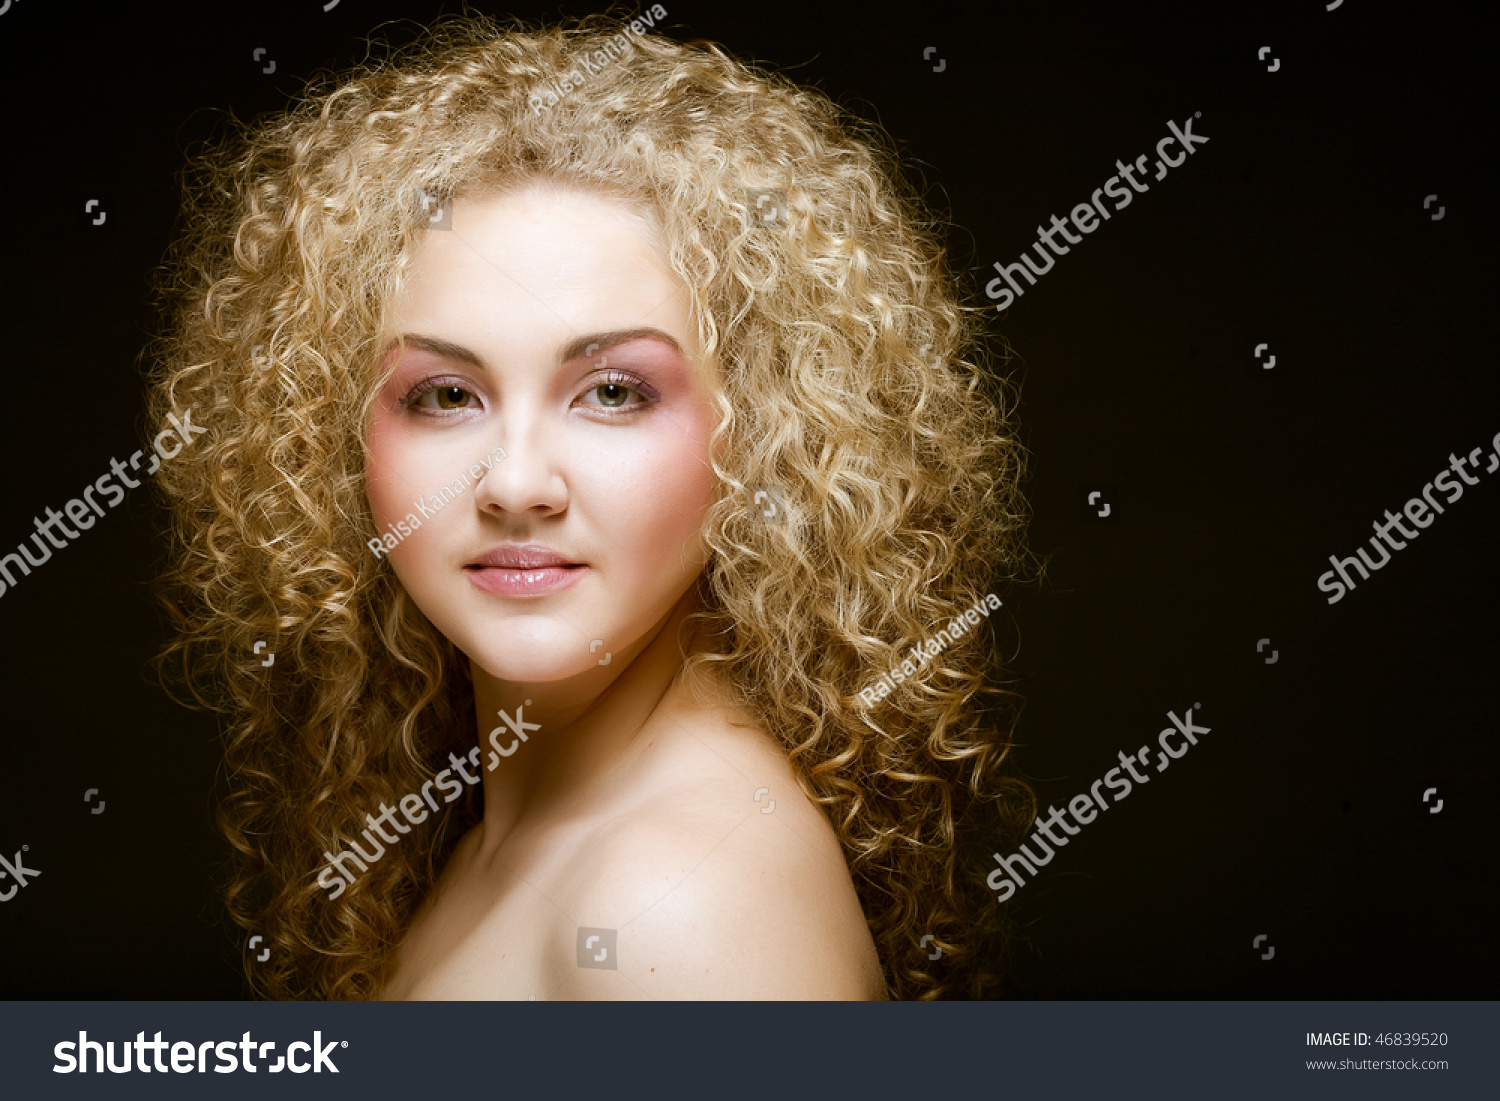 5. Stunning Blonde with Curly Hair - wide 2